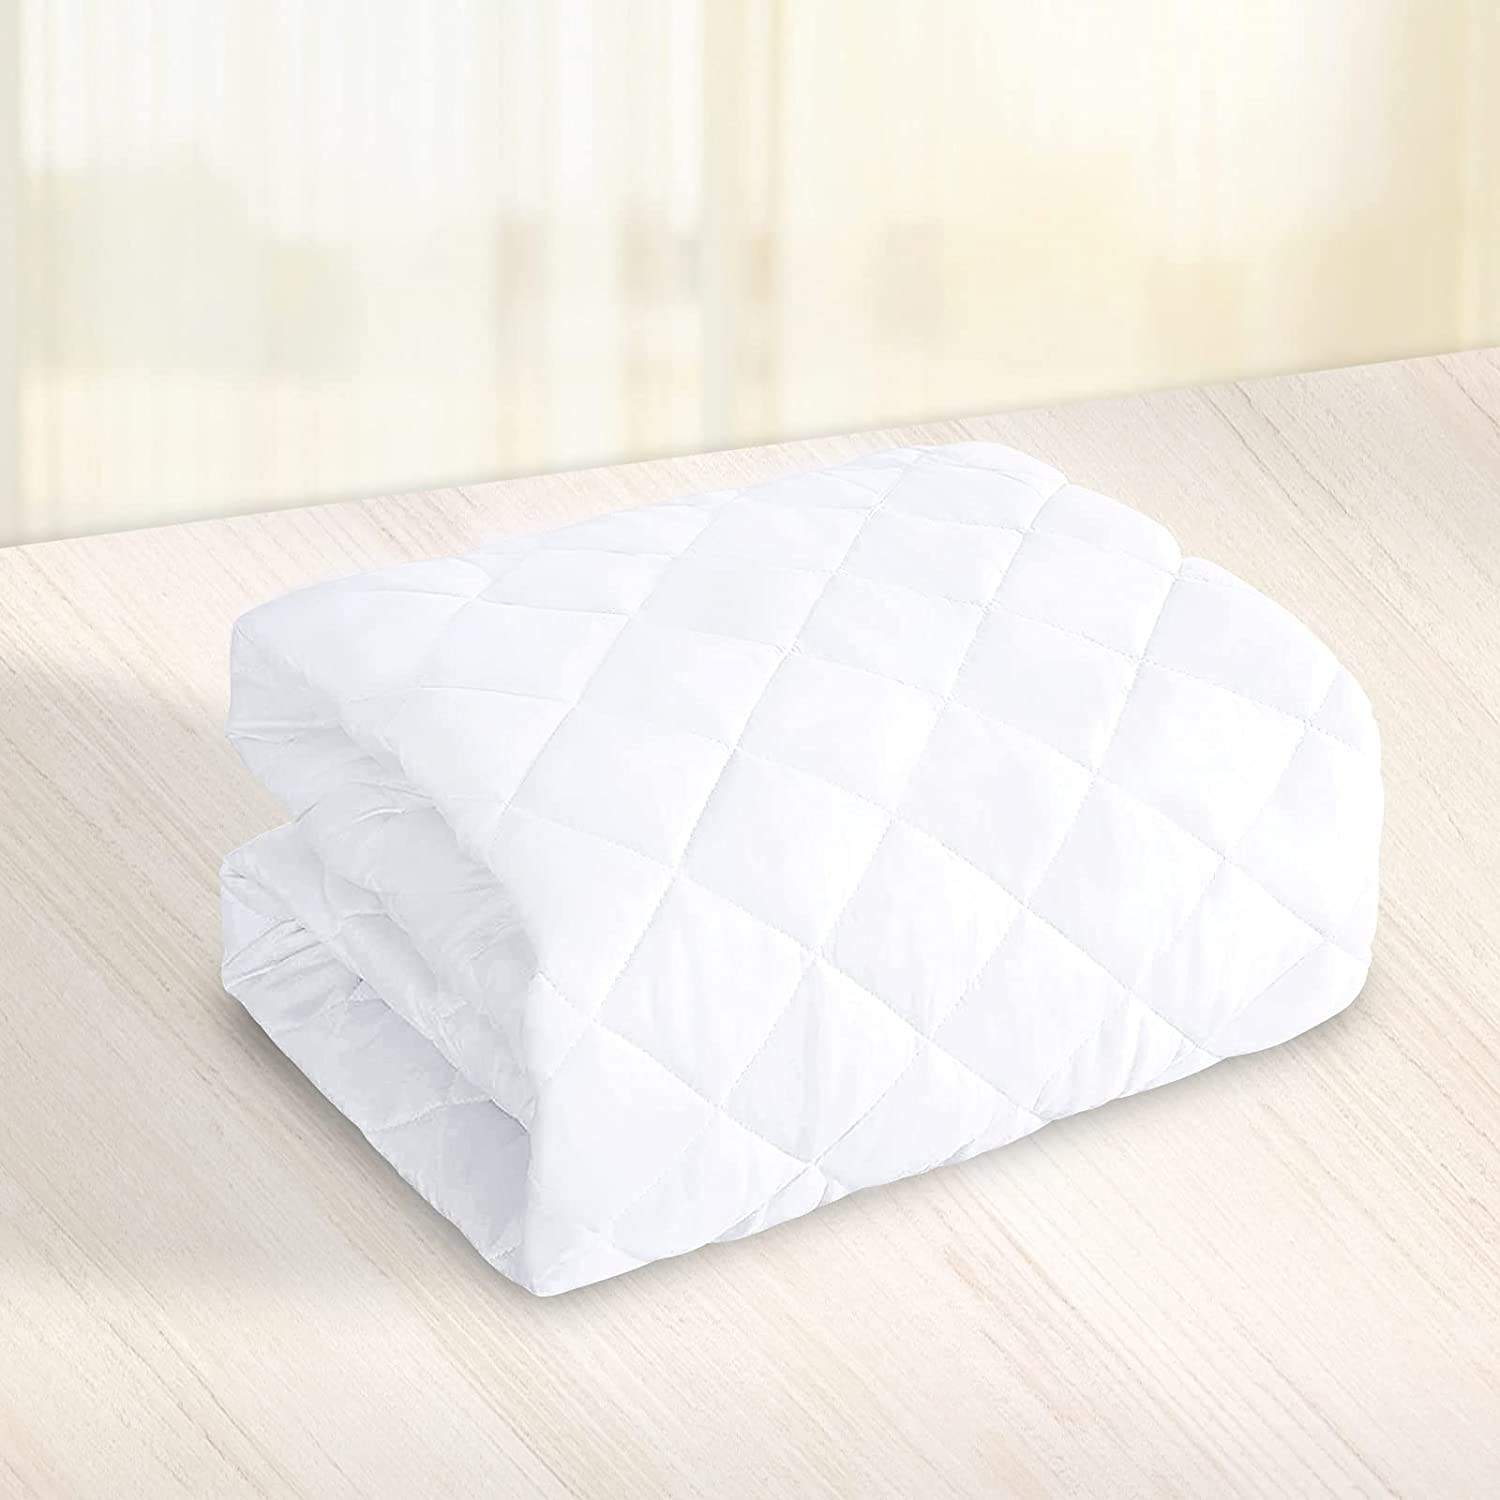 Jadeite star Full Quilted Waterproof Mattress Pad, Cotton Filling Breathable Soft Mattress Protector, Fitted 8" - 21" Deep Pocket Bed Cover